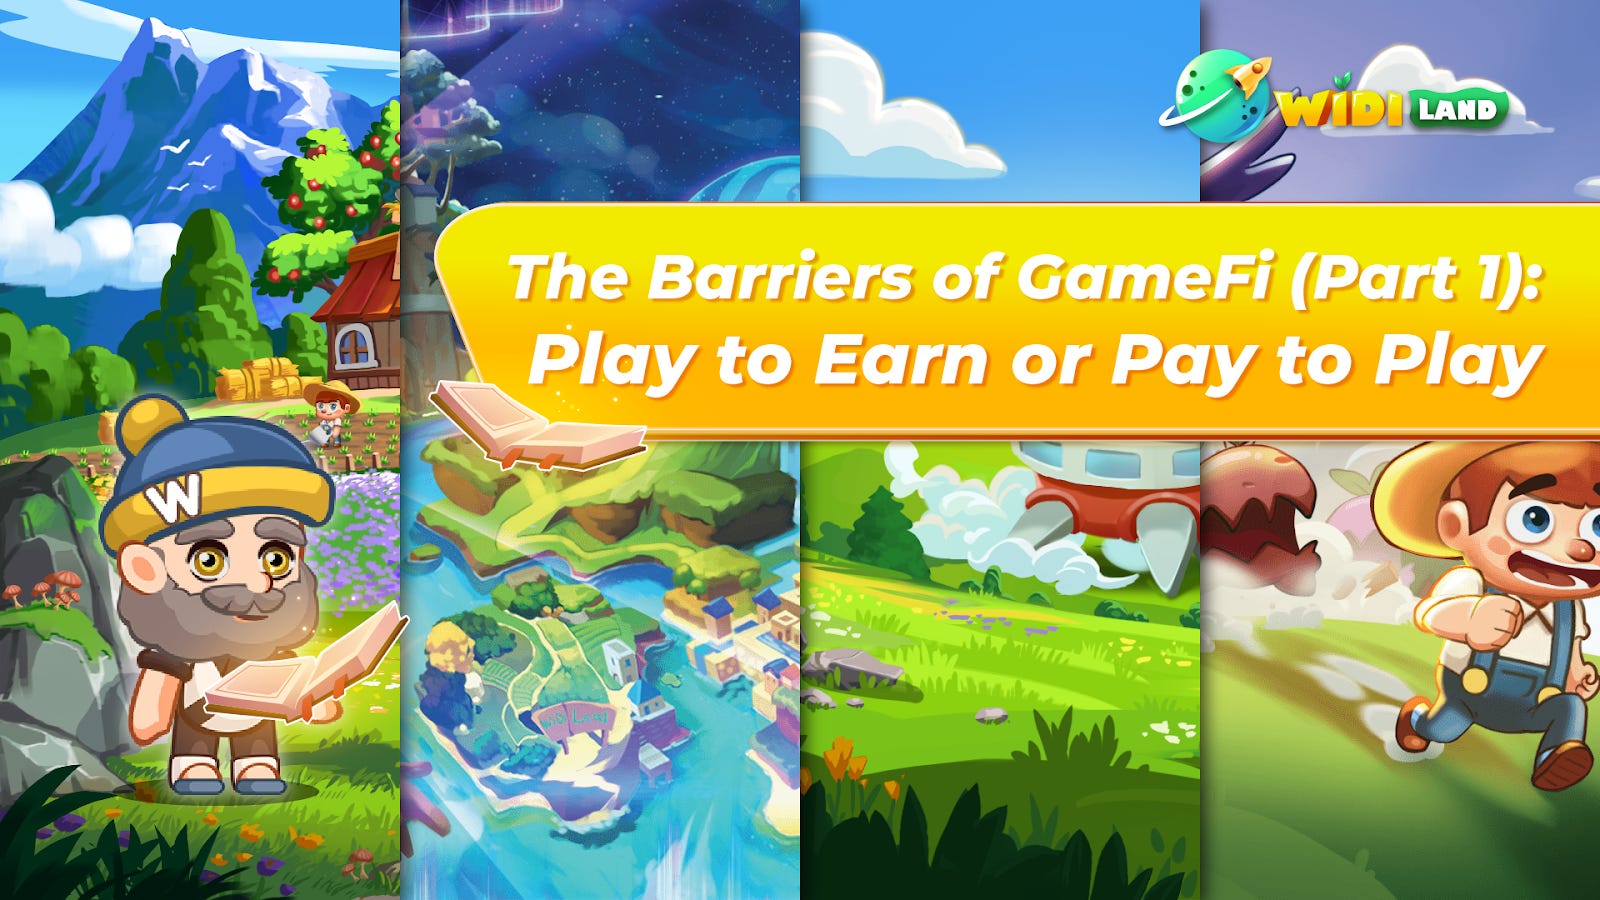 GameFi for Beginners: Play and Earn Money Online